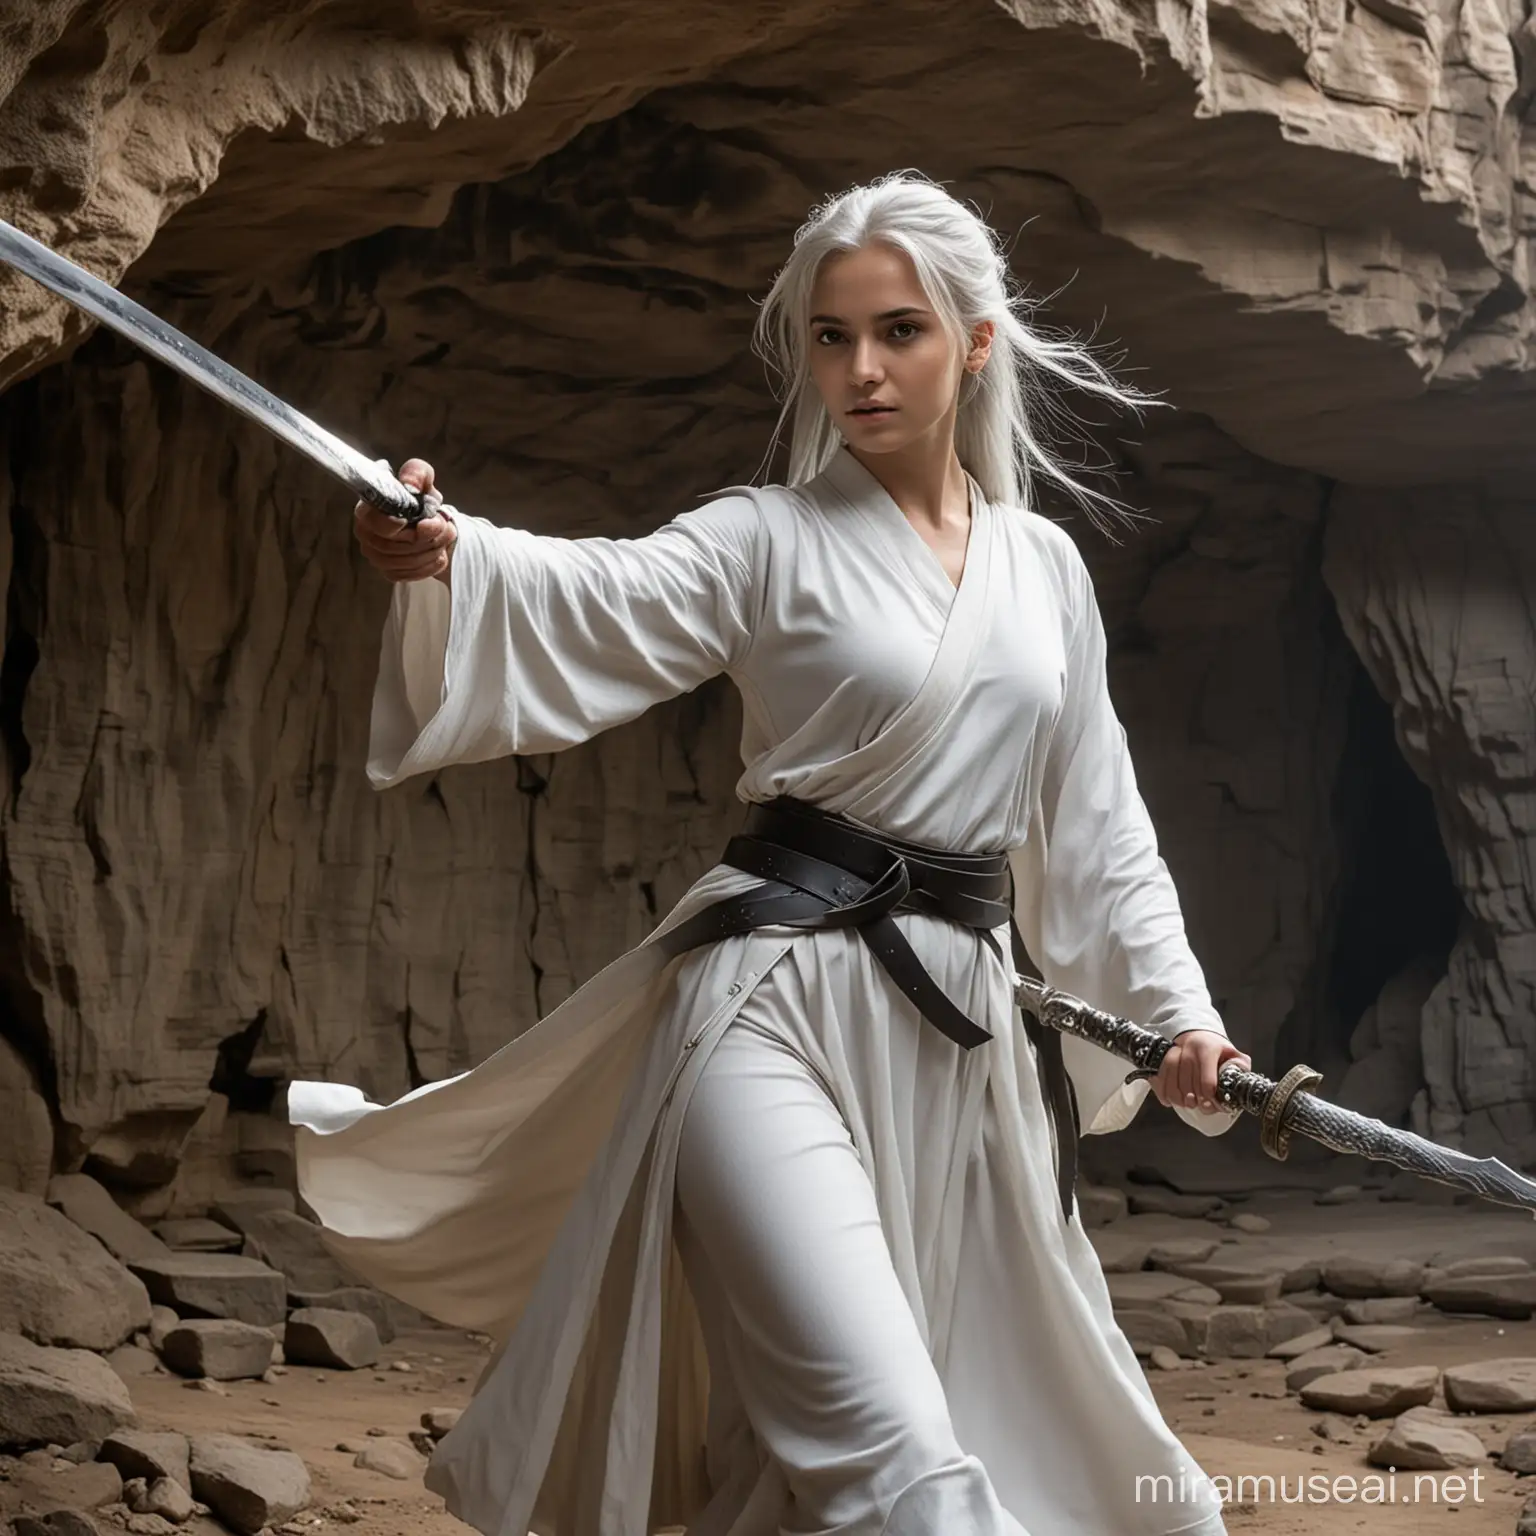 Solo Sword Dance Silverhaired Girl Practices Blade Art in Cave